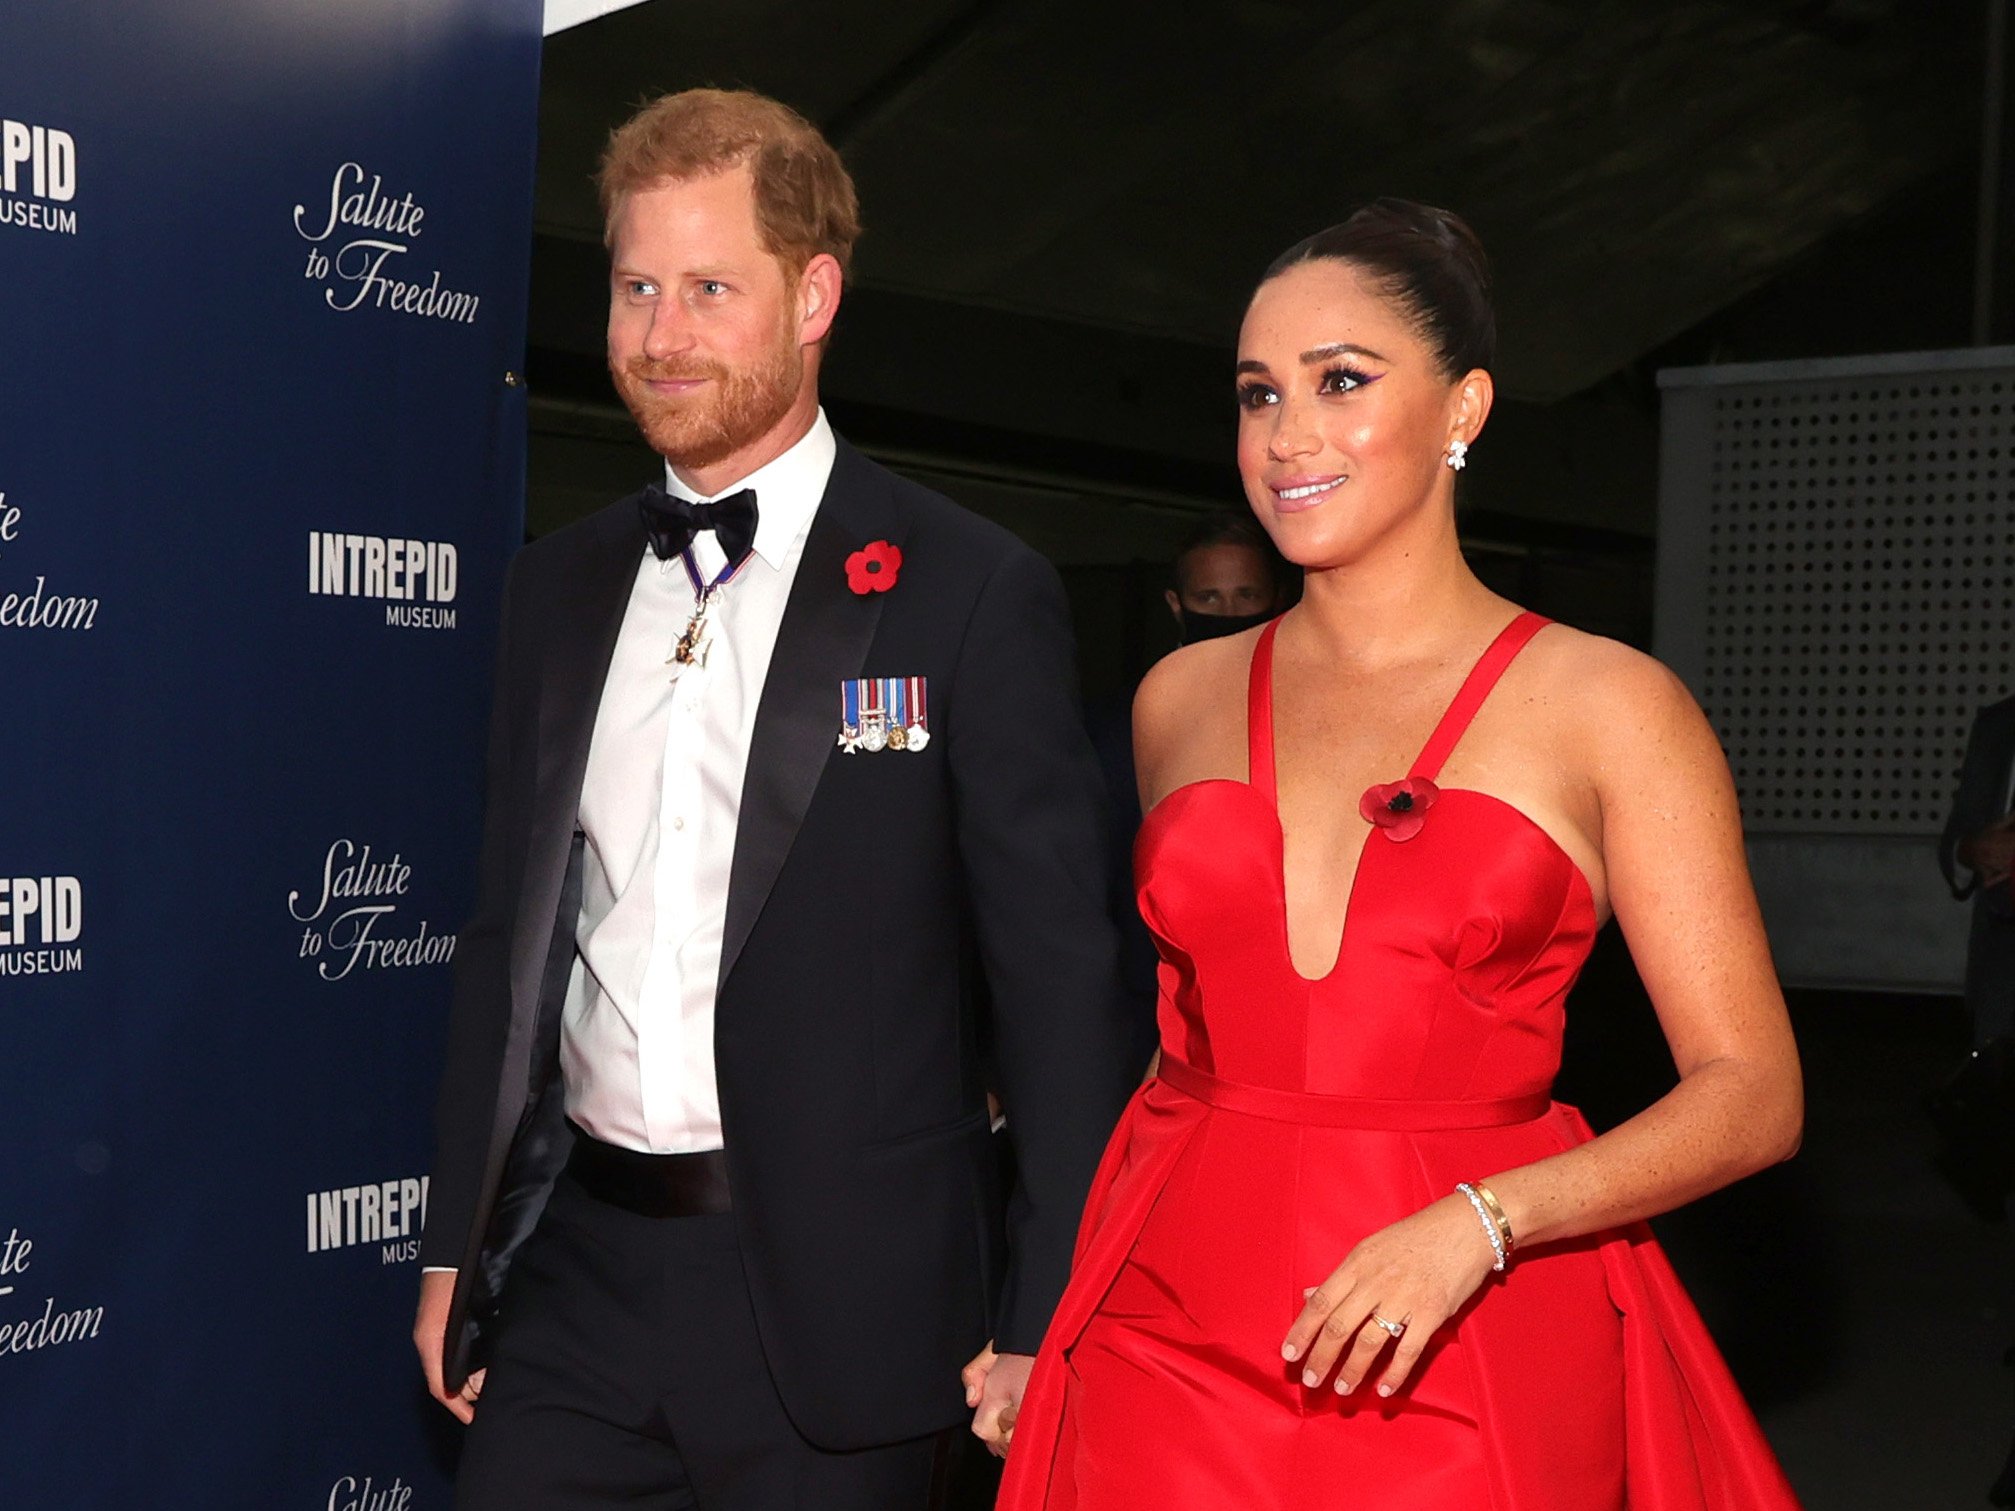 Prince Harry and Duchess Meghan at the Salute To Freedom Gala on November 10, 2021, in New York City. | Source: Getty Images